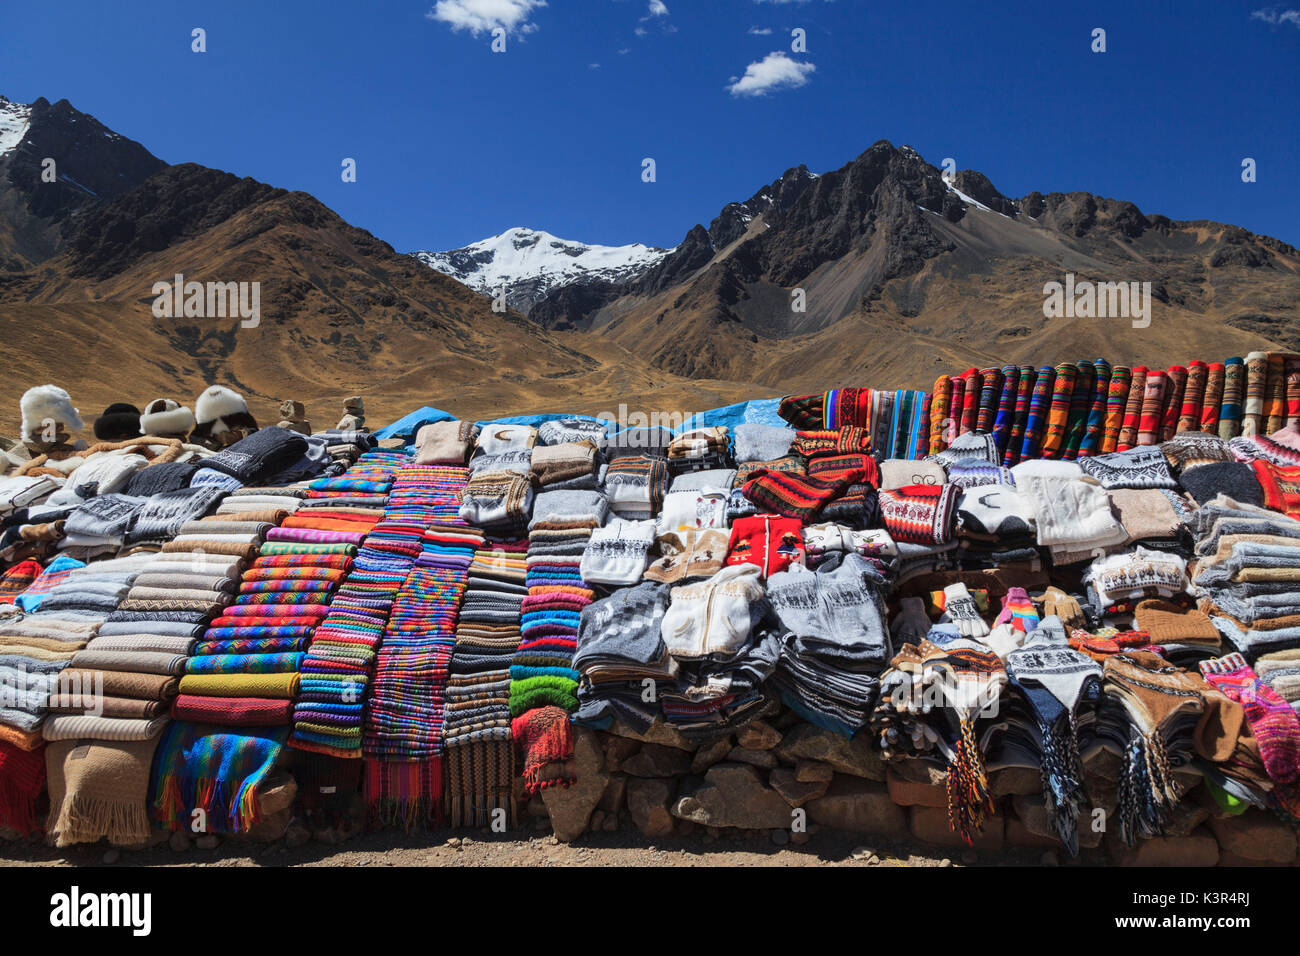 Andean landscape on the way from Cuzco tu Puno, Peru, South America Stock Photo